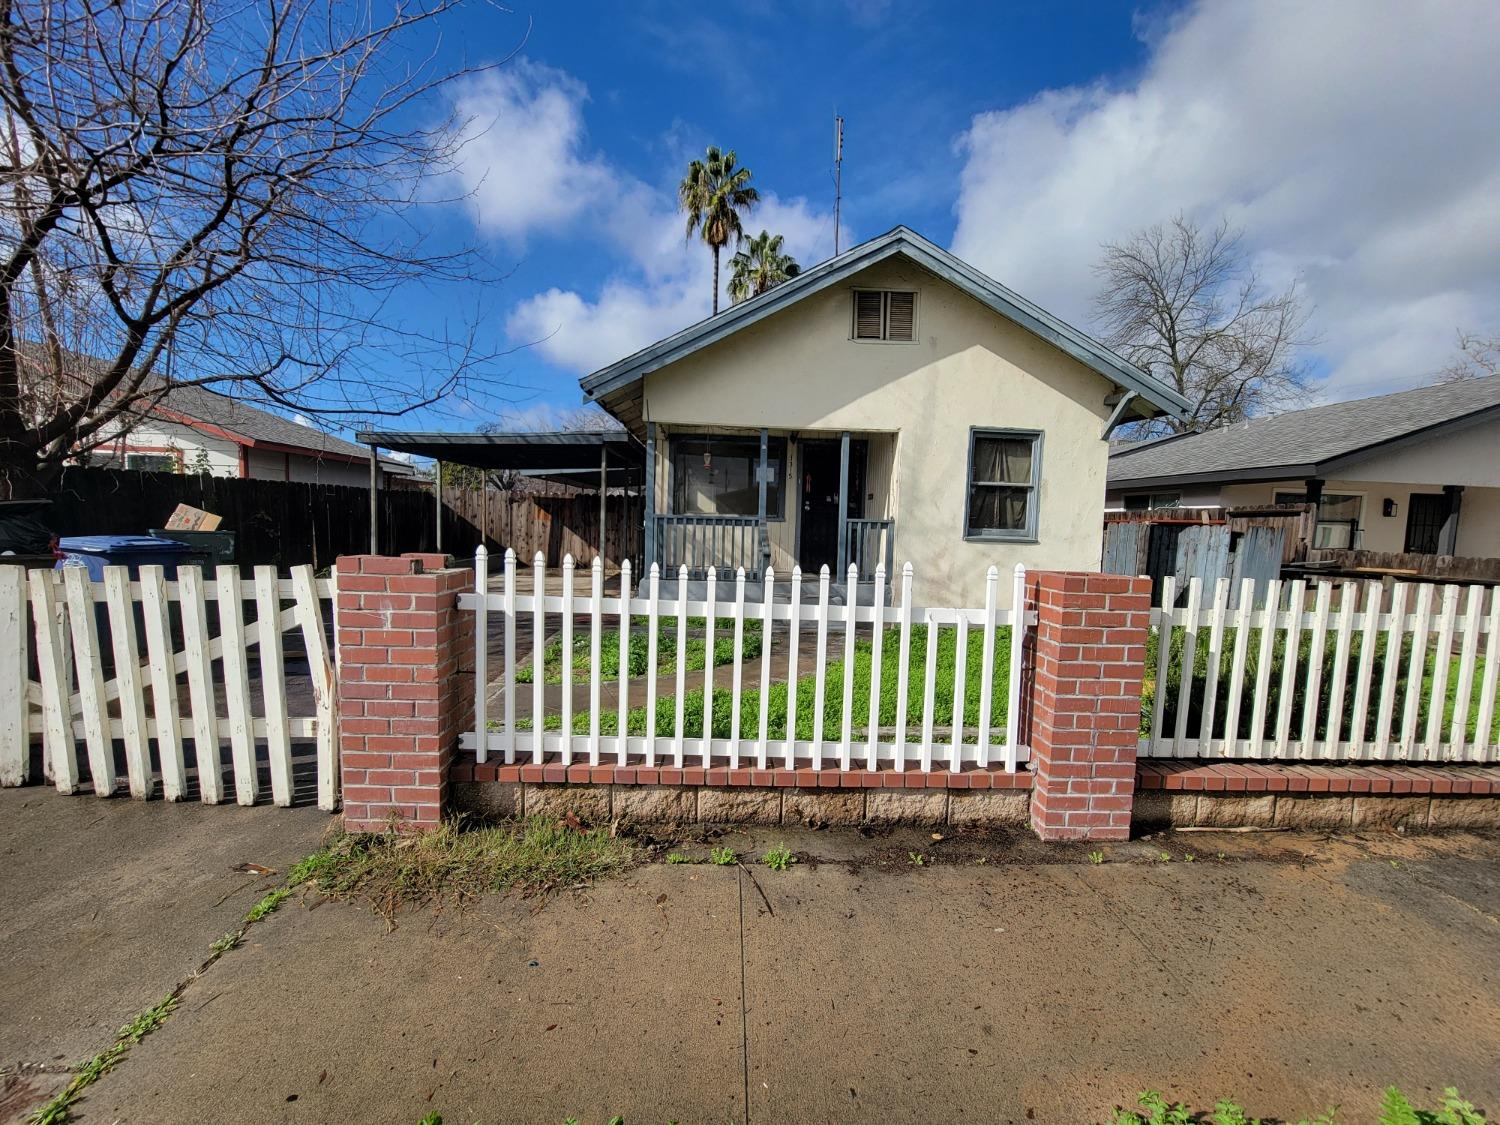 Photo of 1315 Olive Ave in Sanger, CA